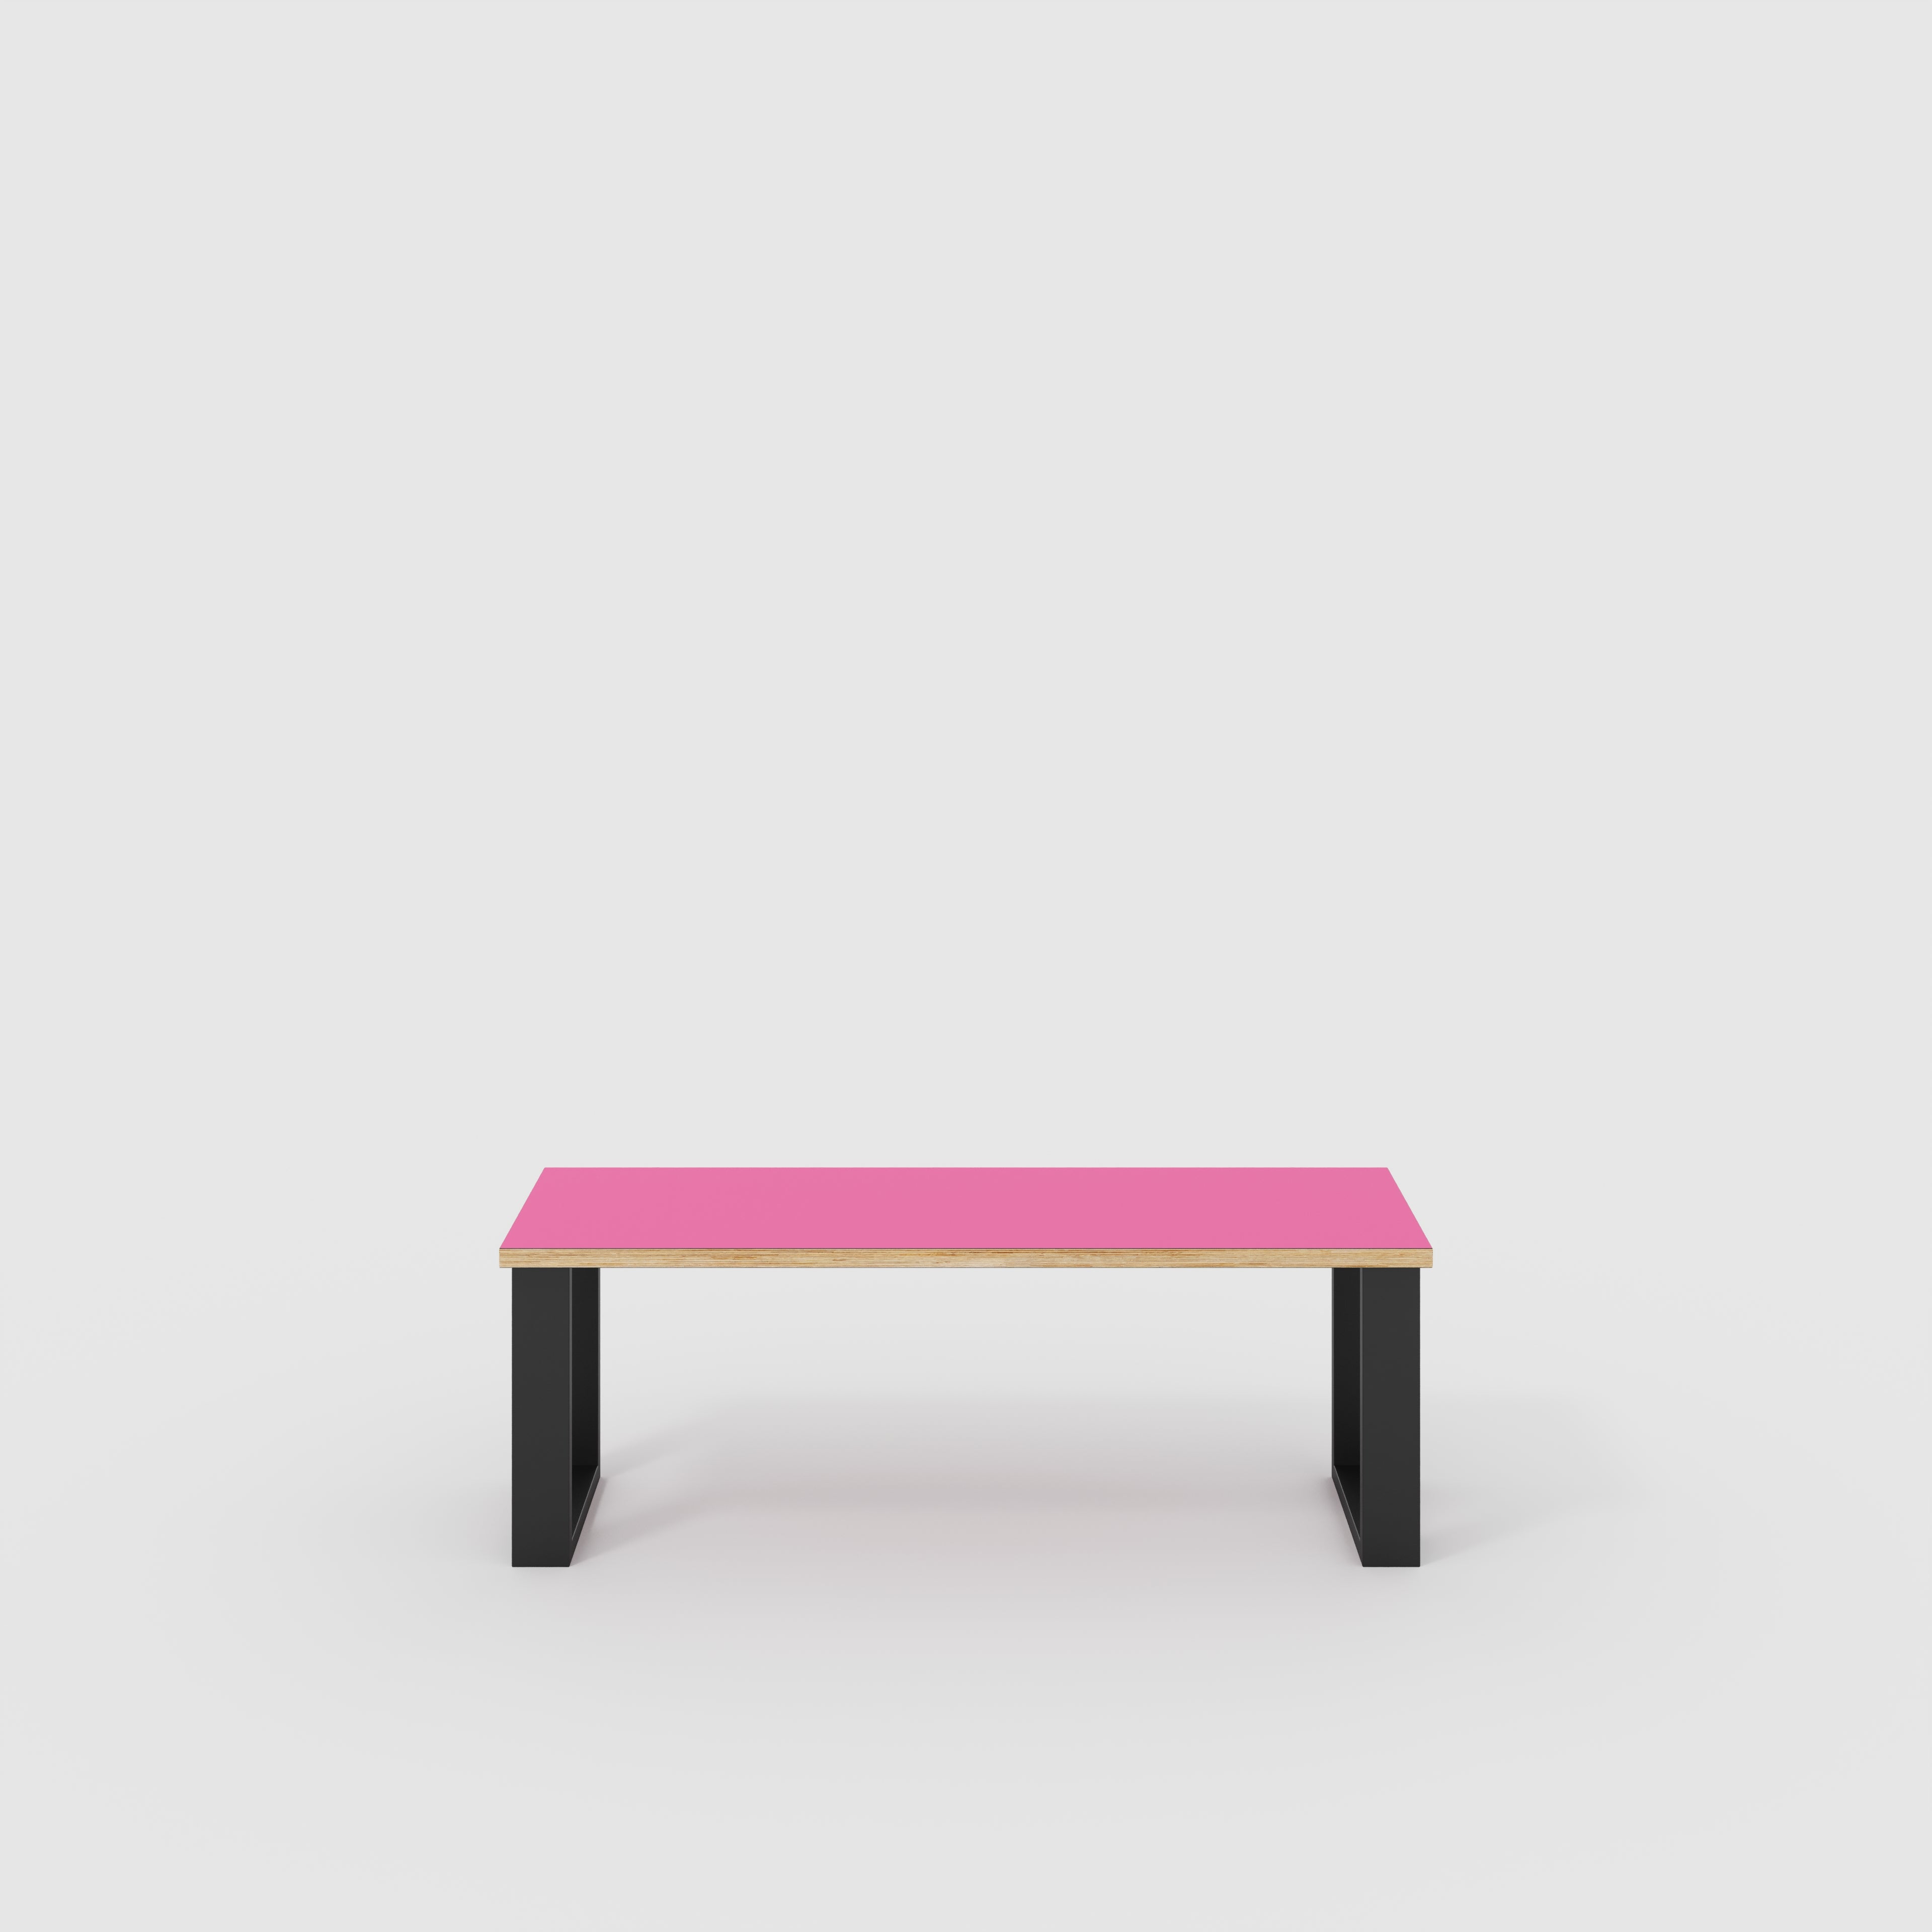 Bench Seat with Black Industrial Legs - Formica Juicy Pink - 1200(w) x 400(d)